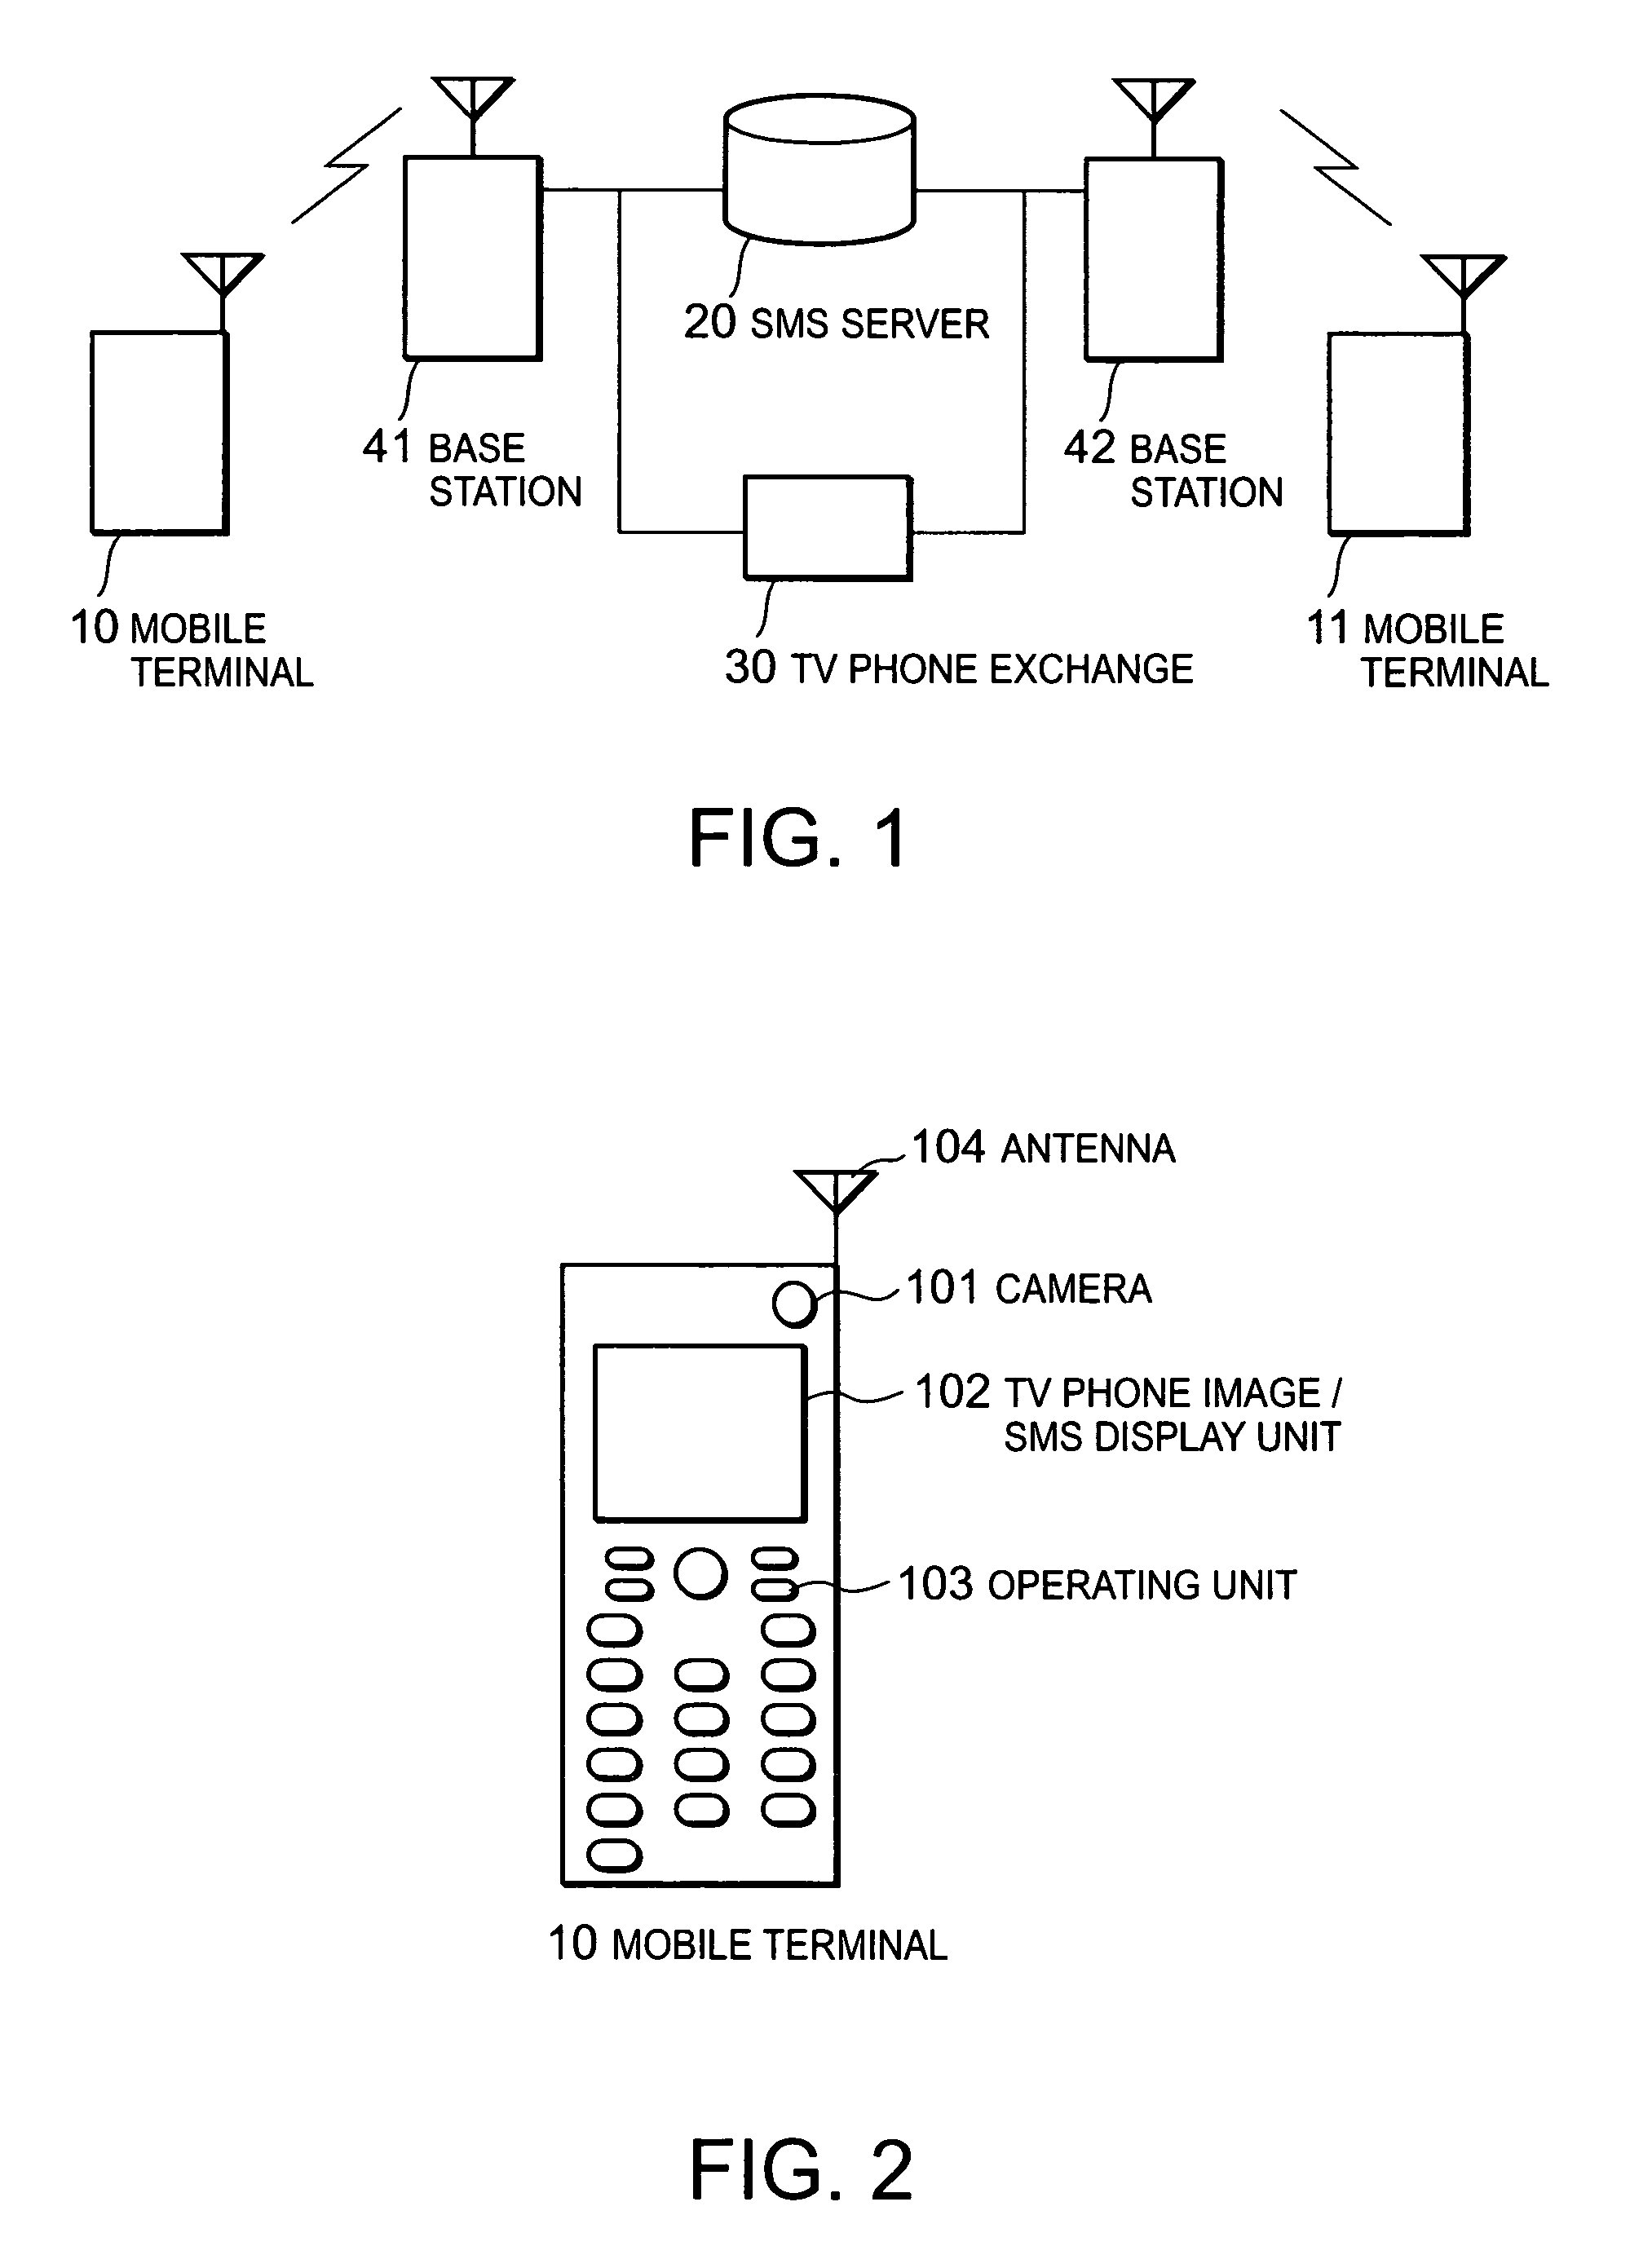 Receiving and sending method of mobile TV phone and mobile TV phone terminal